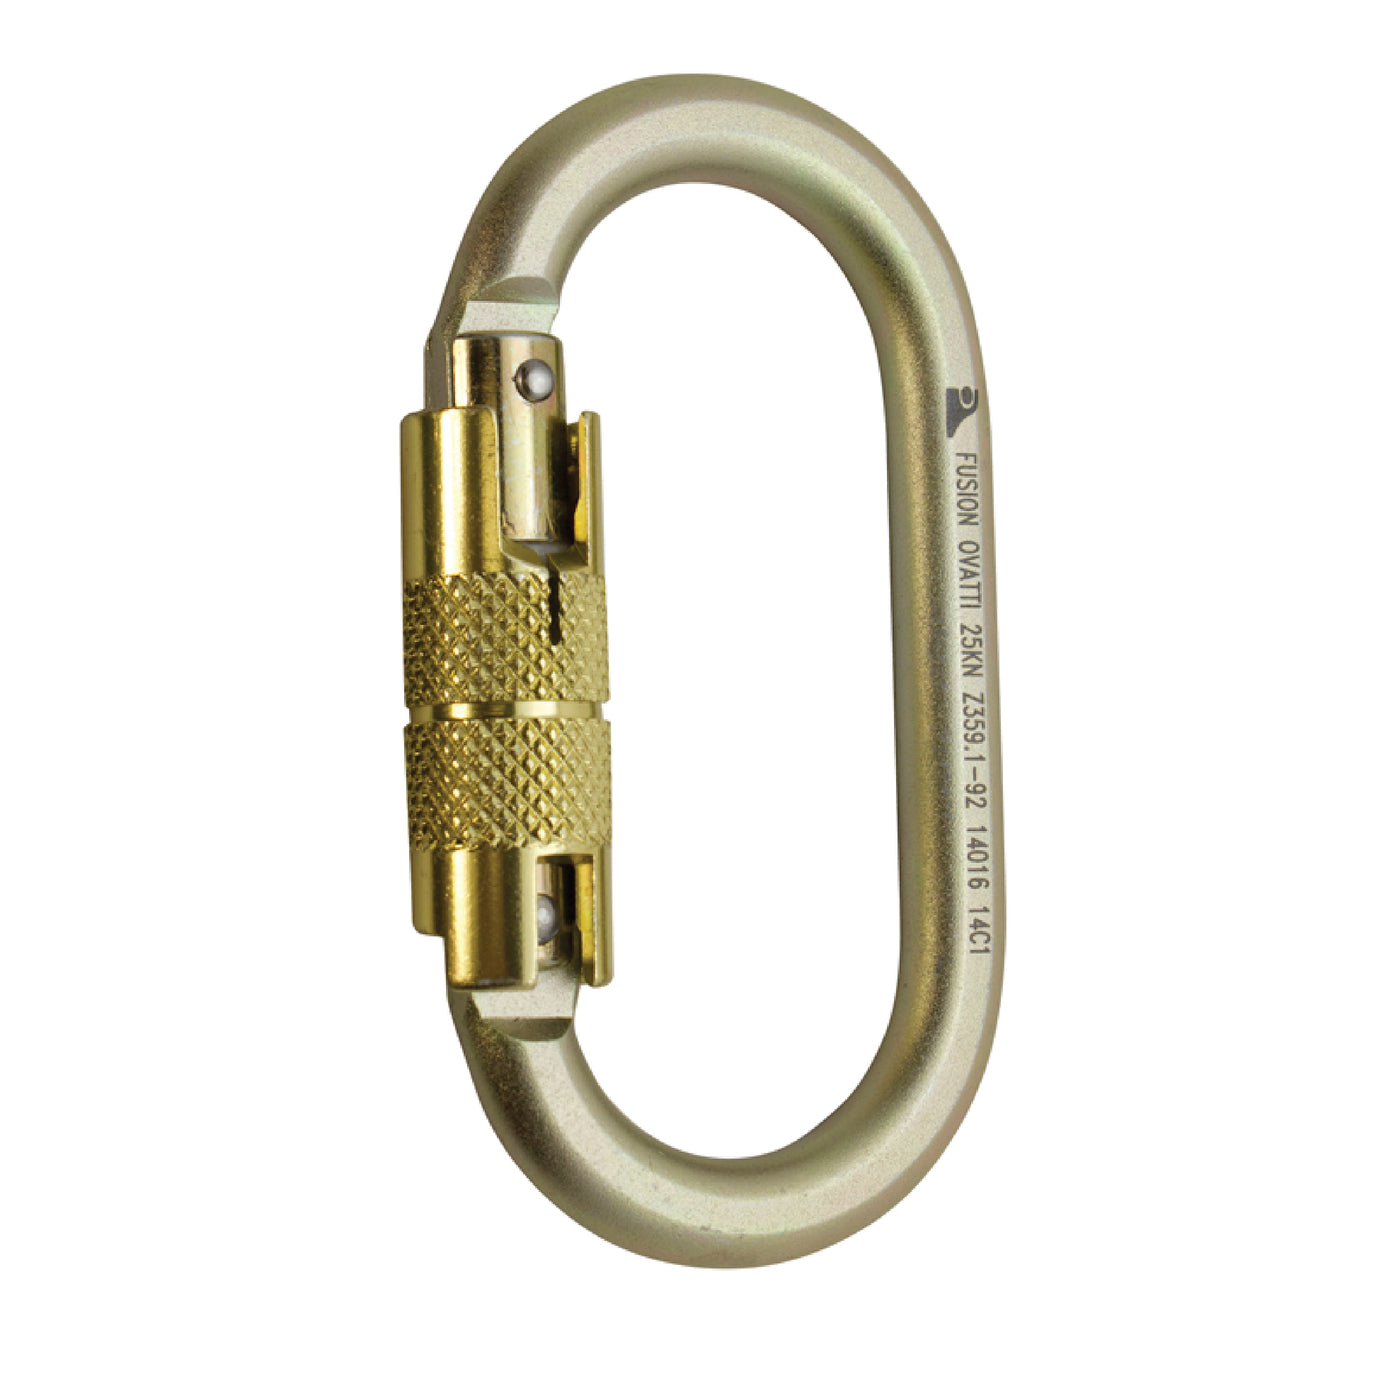 Gold Steel Auto Lock Carabiner for Lifeline Rope, Construction, Climbing, and Fall-Protection